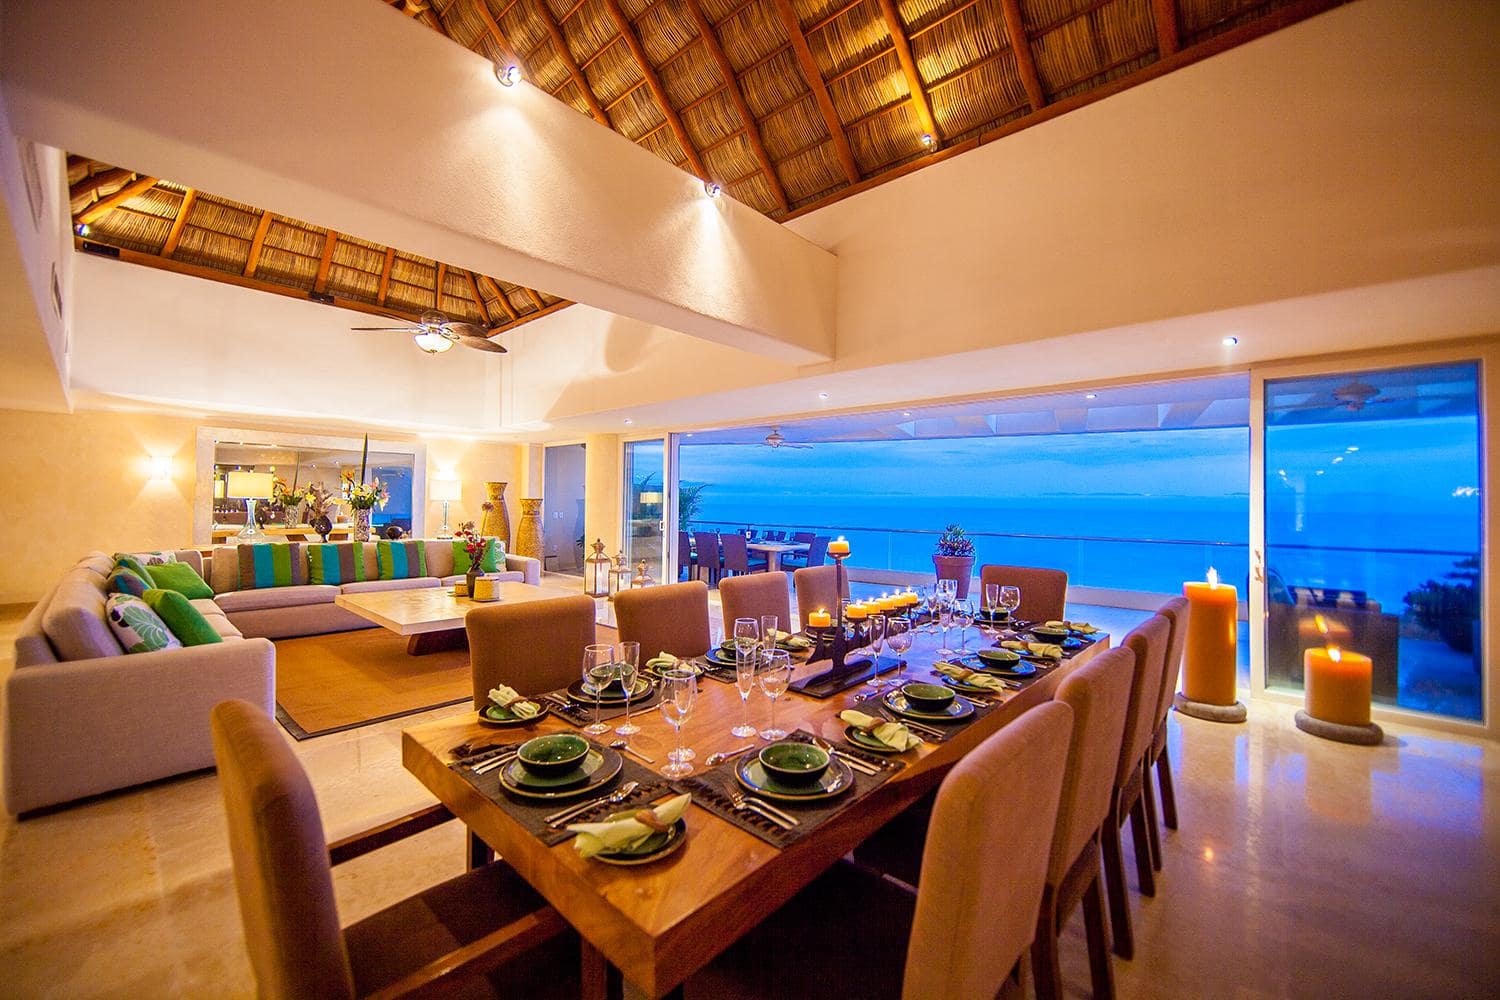 Elegant Coastal Dining Room: Indulge in a culinary experience like no other in this elegant coastal dining room.